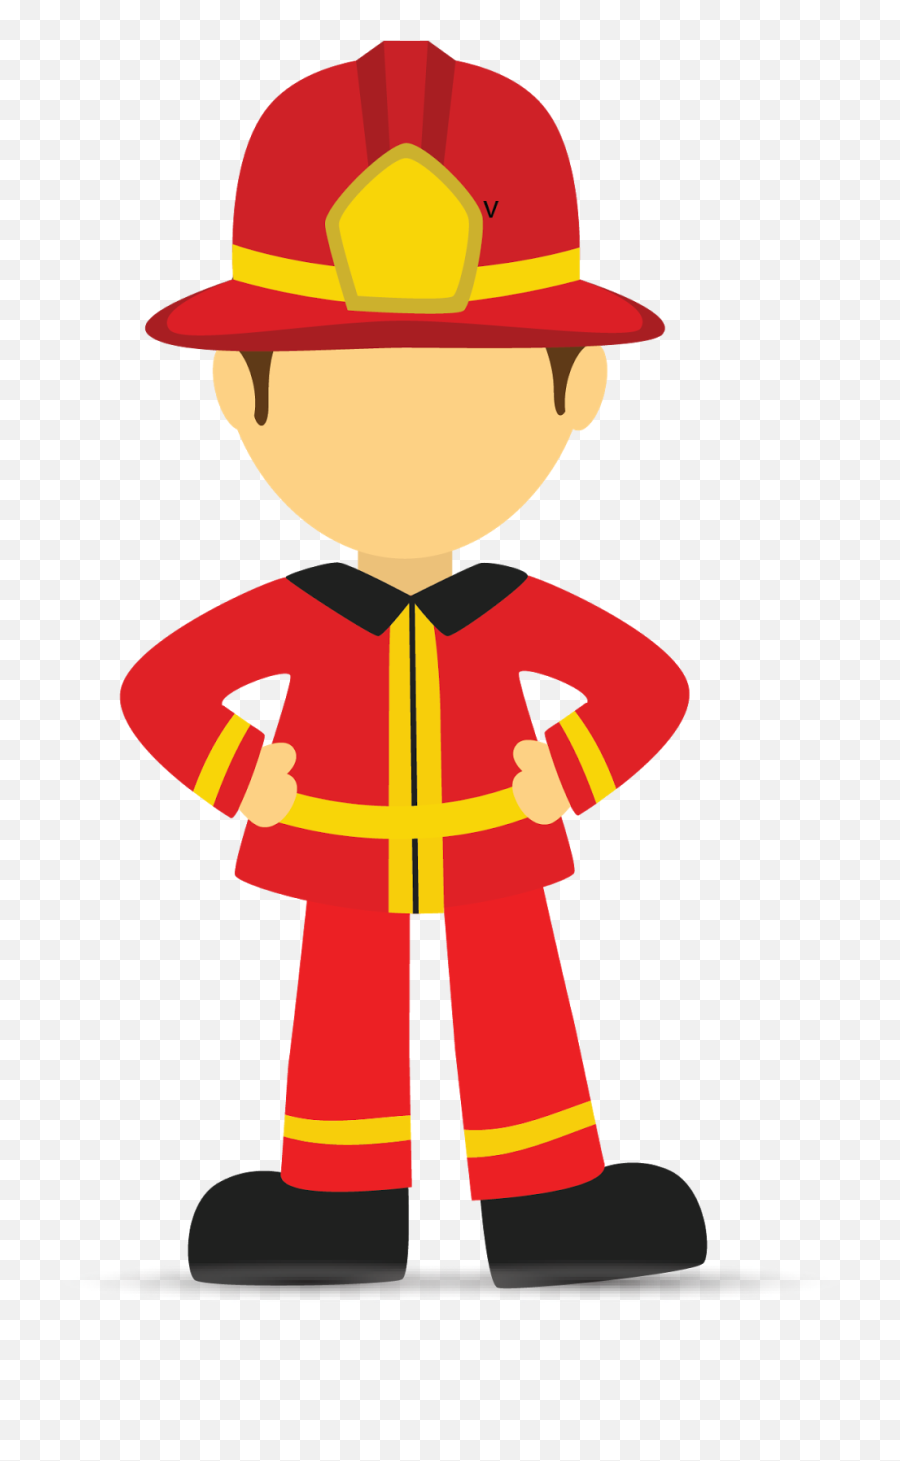 Fire Fighter Icon Png Transparent - Dibujos De Bomberos Animados,Firefighter Icon Png